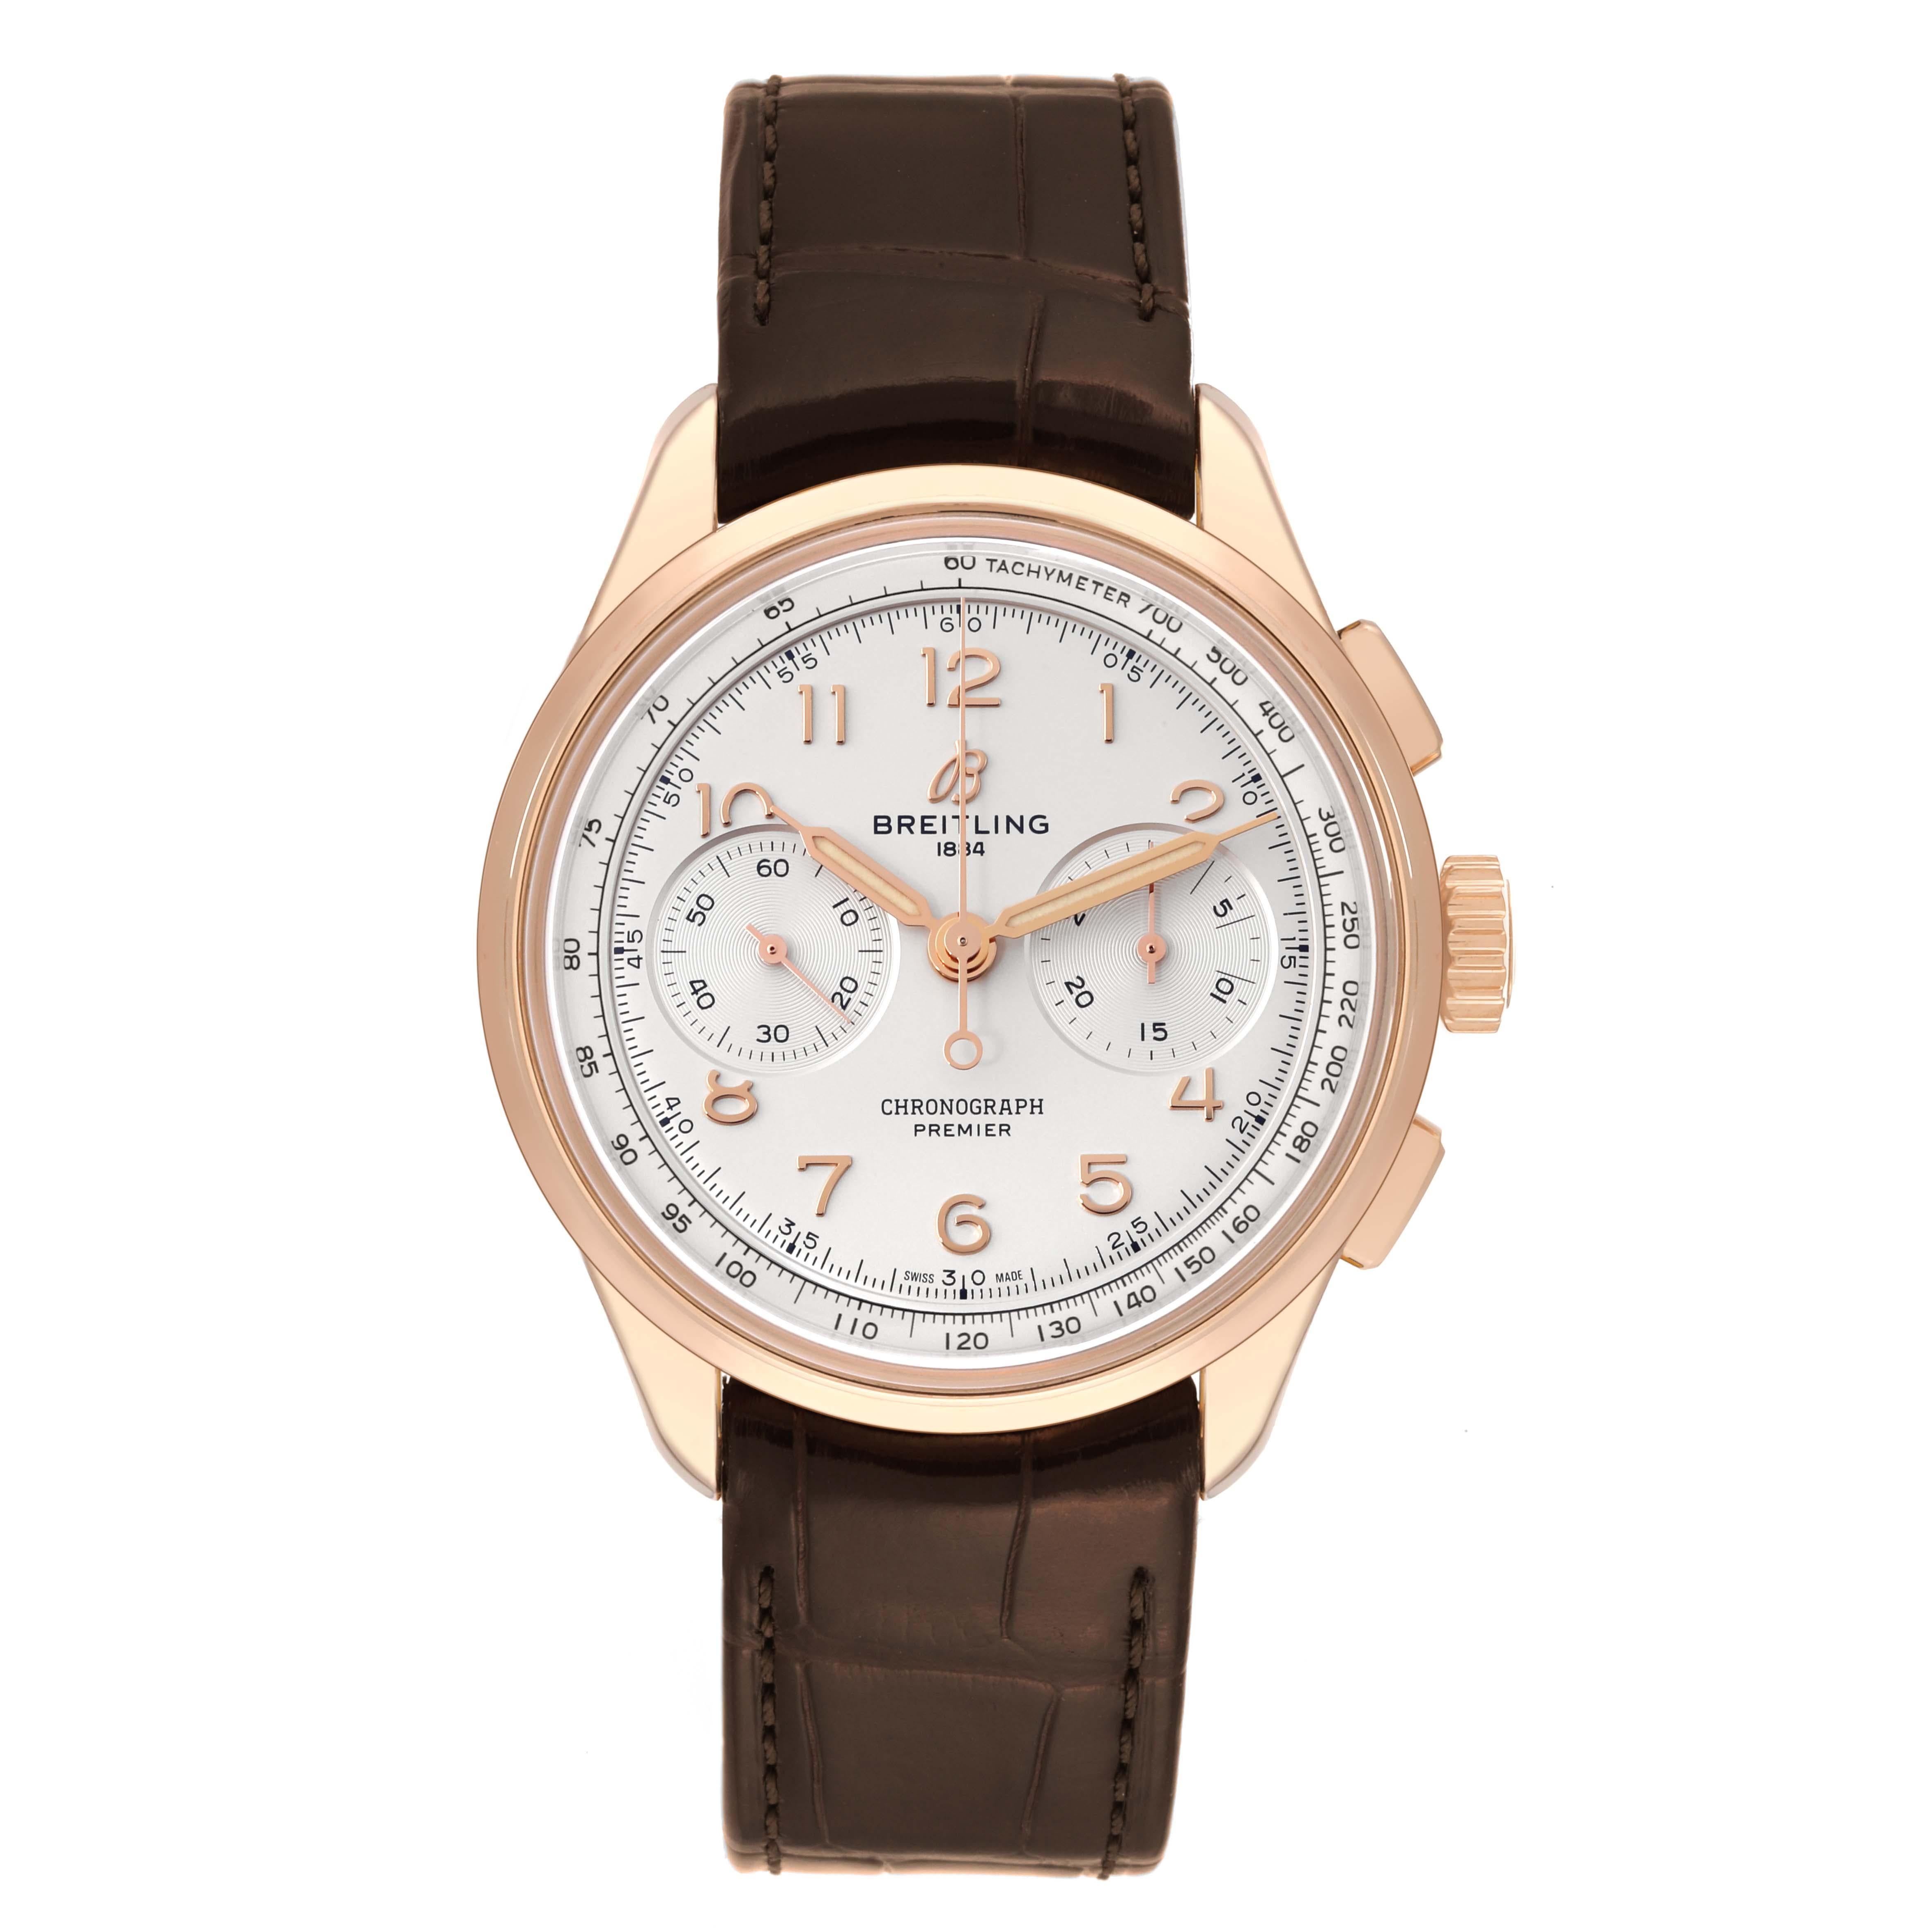 Breitling Premier B09 Chronograph 40 Rose Gold Mens Watch RB0930 Box Card. Manual winding chronograph movement. 18k rose gold round case 40.0 mm in diameter. Transparent exhibition sapphire crystal caseback. 18k rose gold bezel. Scratch resistant